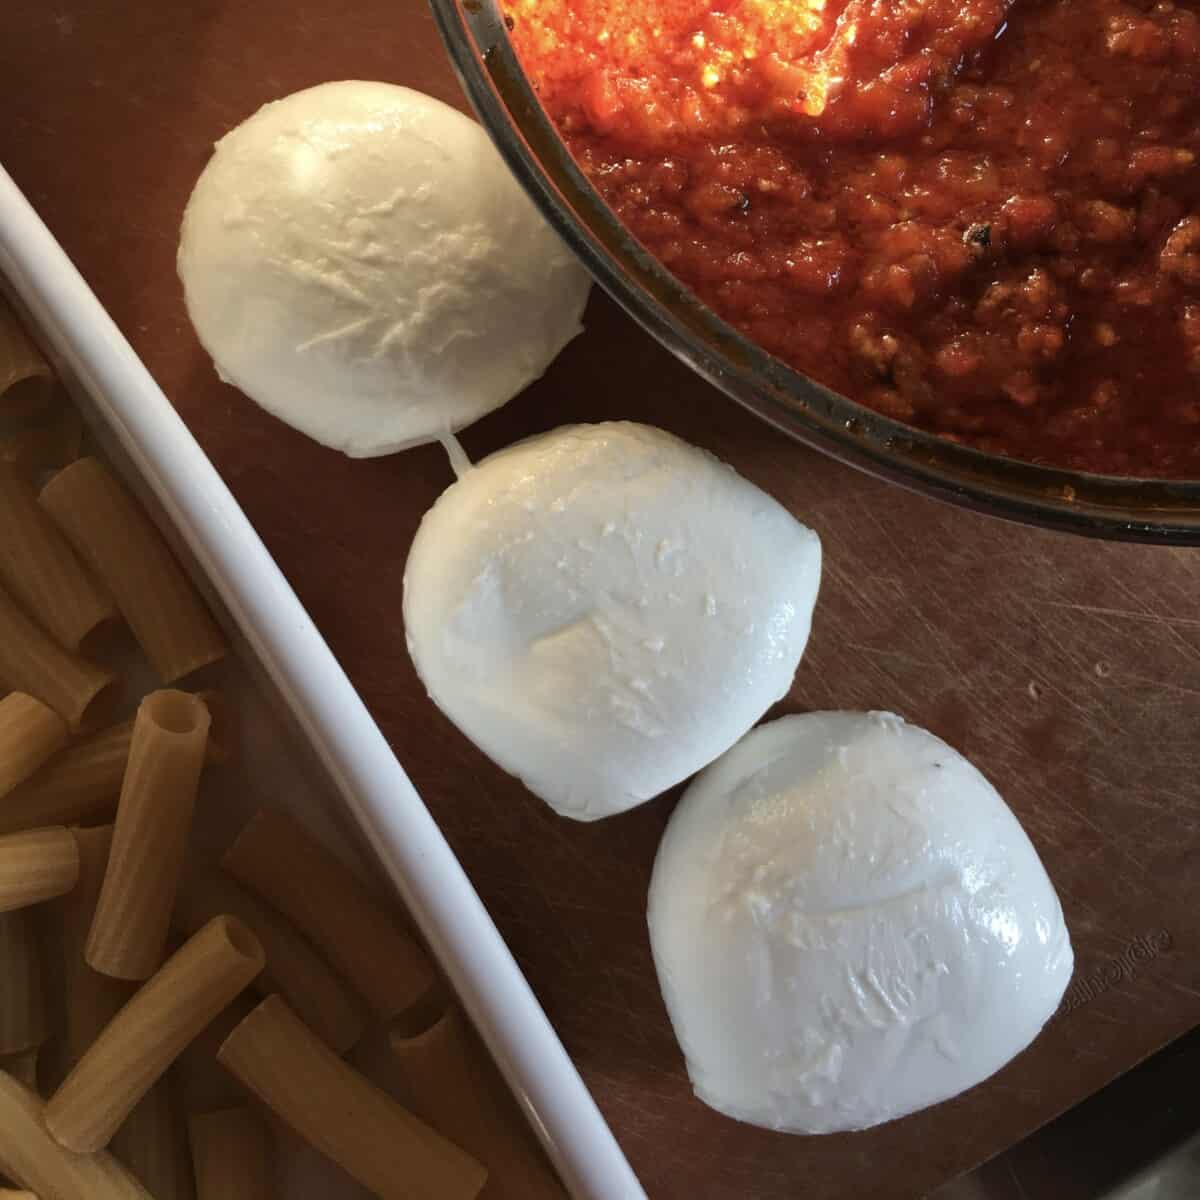 3 fresh balls of mozzarella in between pasta and pasta sauce on a cutting board